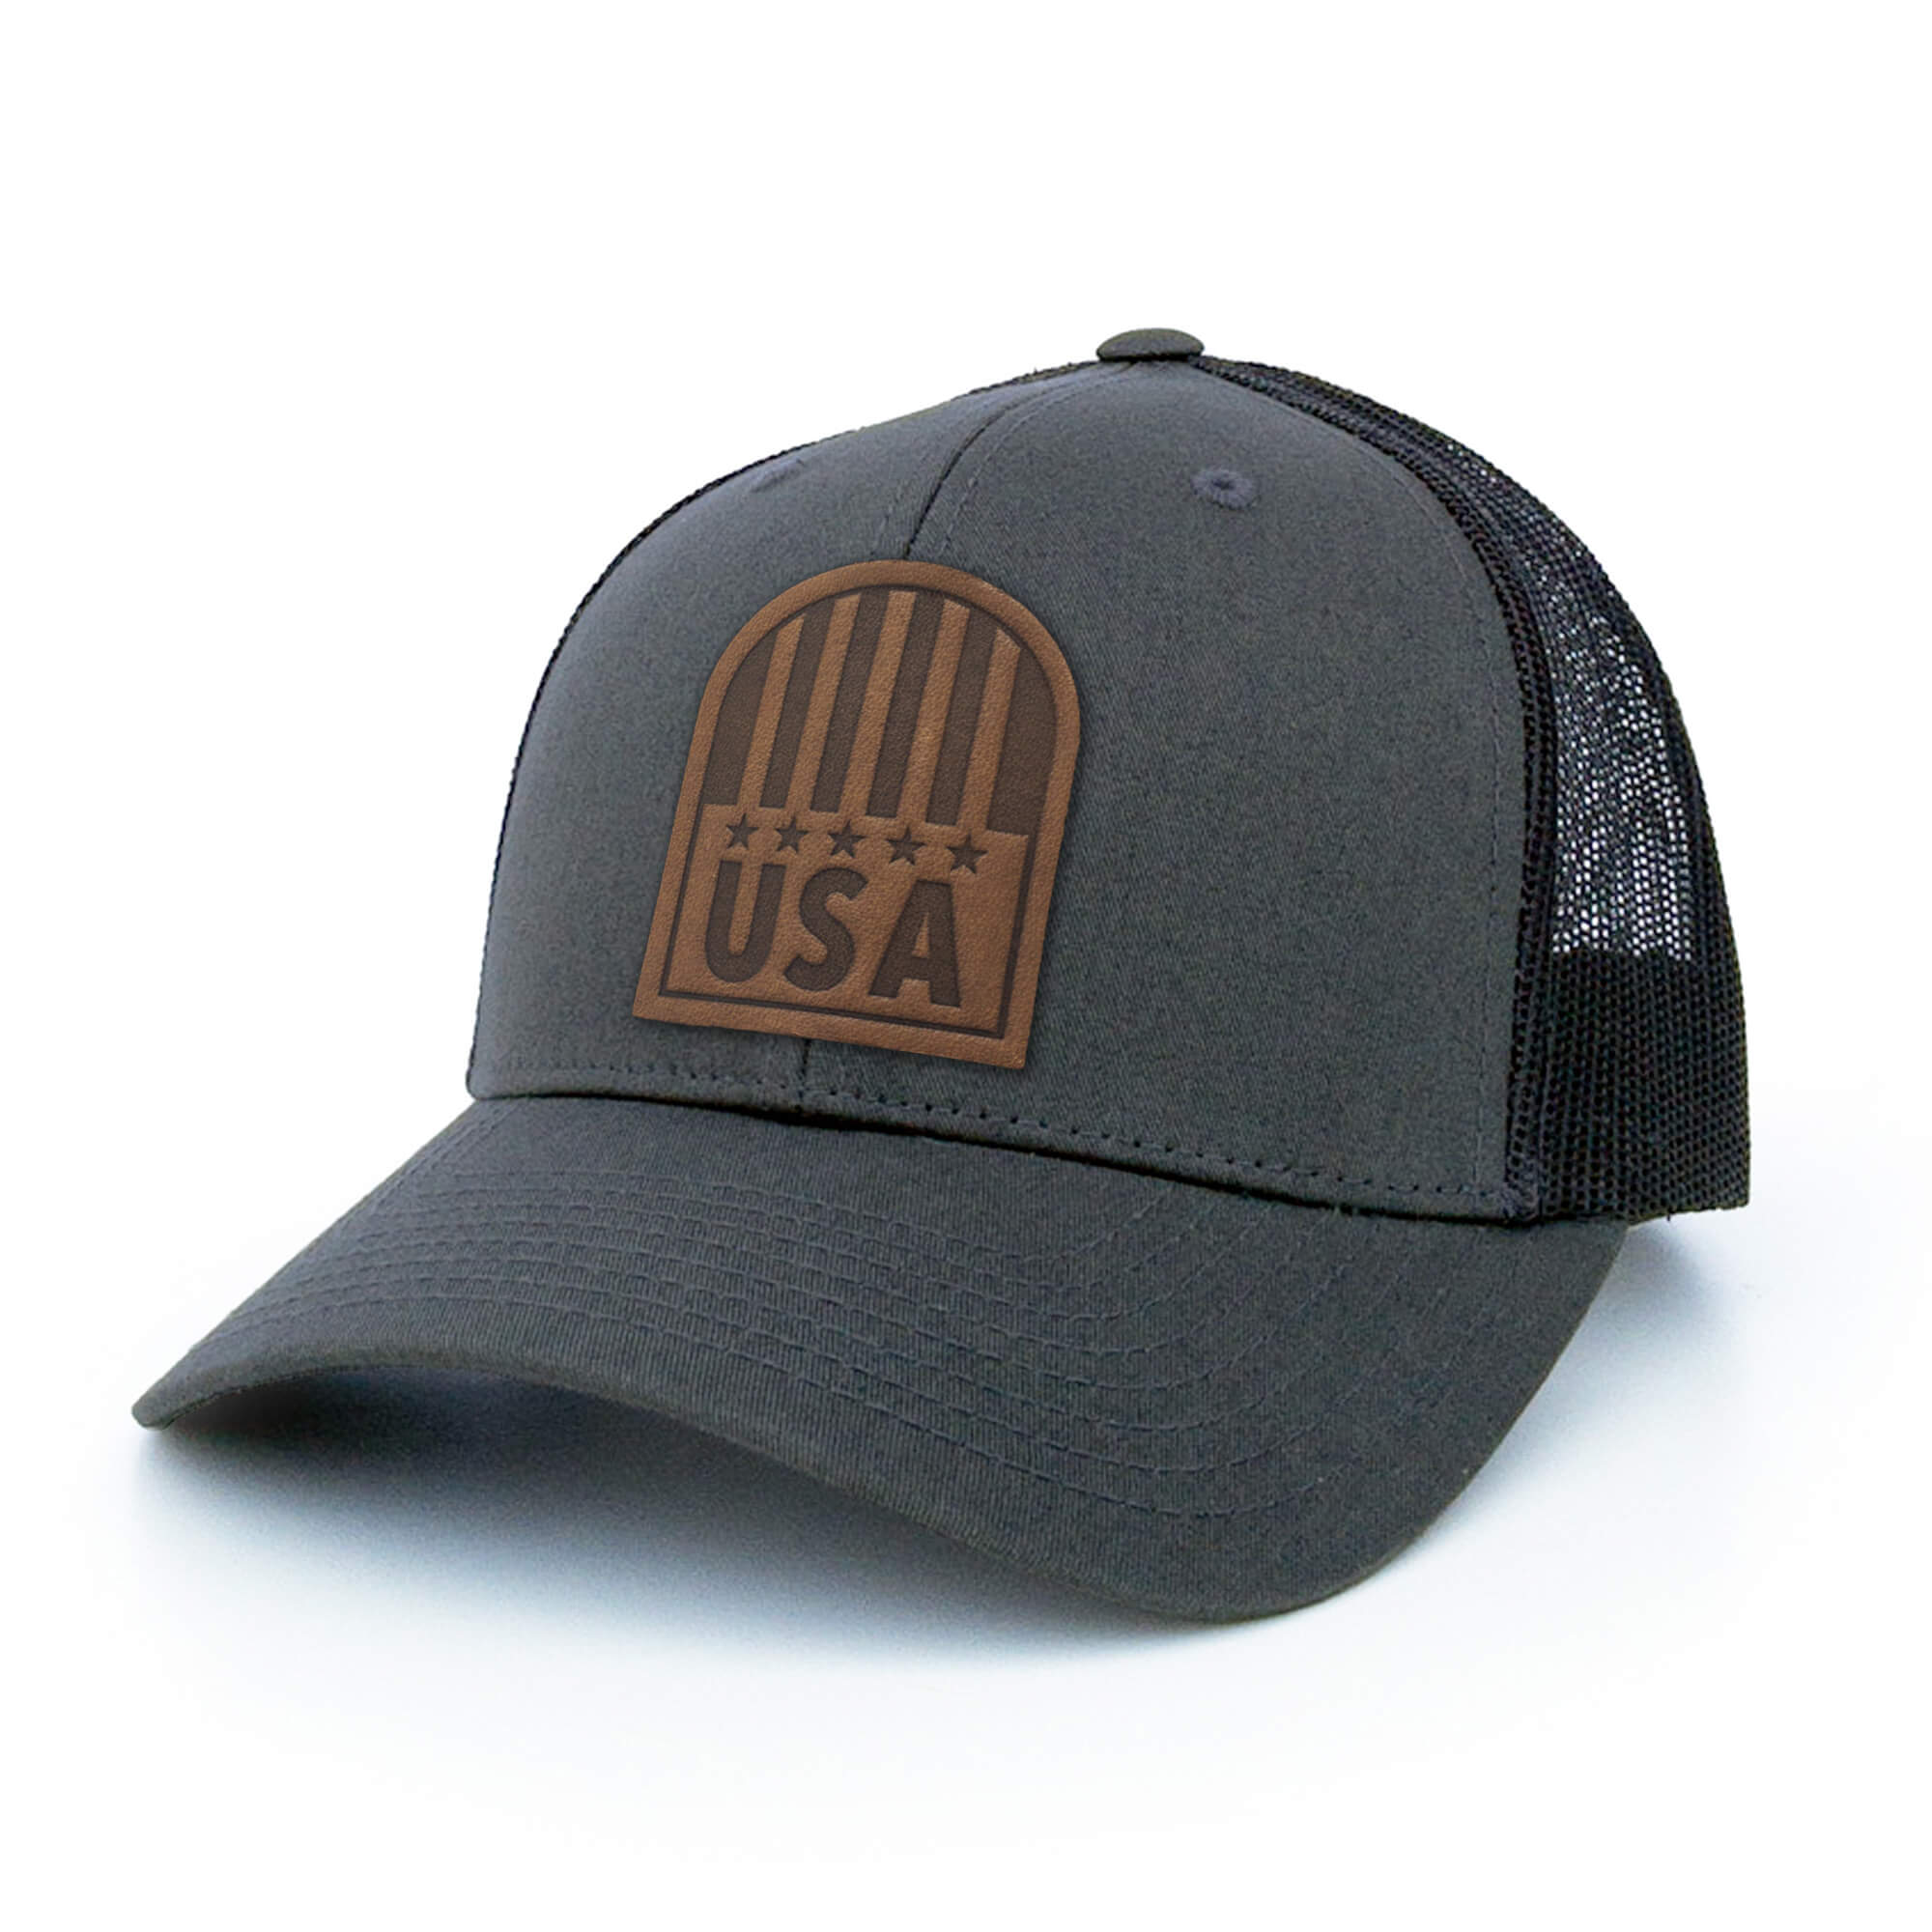 Charcoal trucker hat with full-grain leather patch of USA Crest | BLACK-003-013, CHARC-003-013, NAVY-003-013, HGREY-003-013, MOSS-003-013, BROWN-003-013